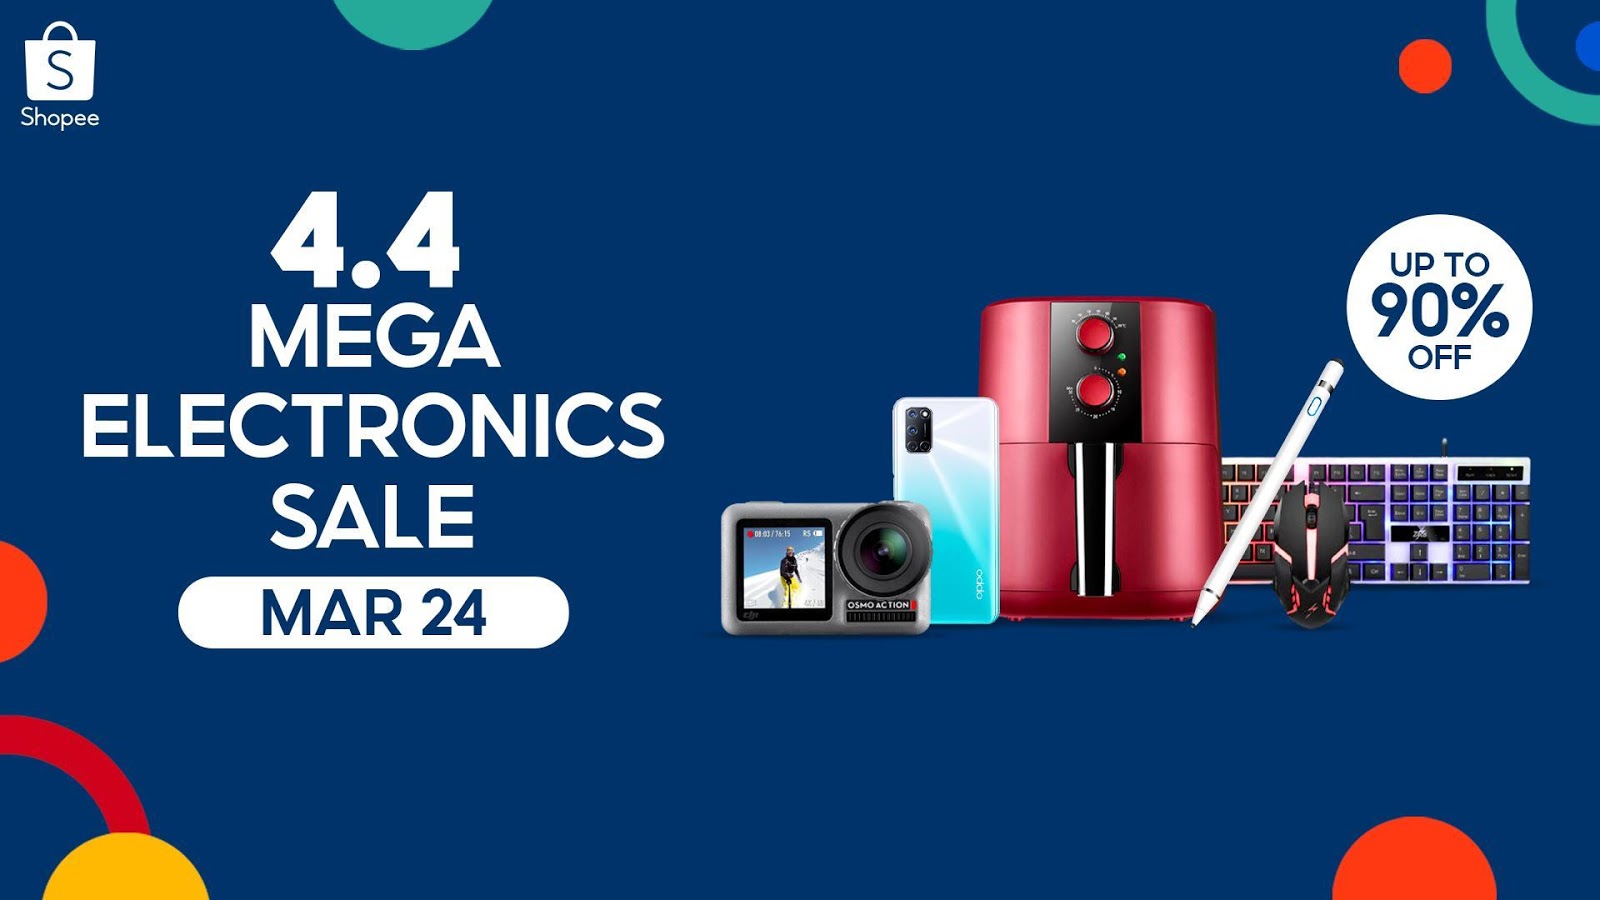 Shopee’s 4.4 Mega Electronics Sale on March 24! Cameras, gaming keyboards and more on sale up to 90% off